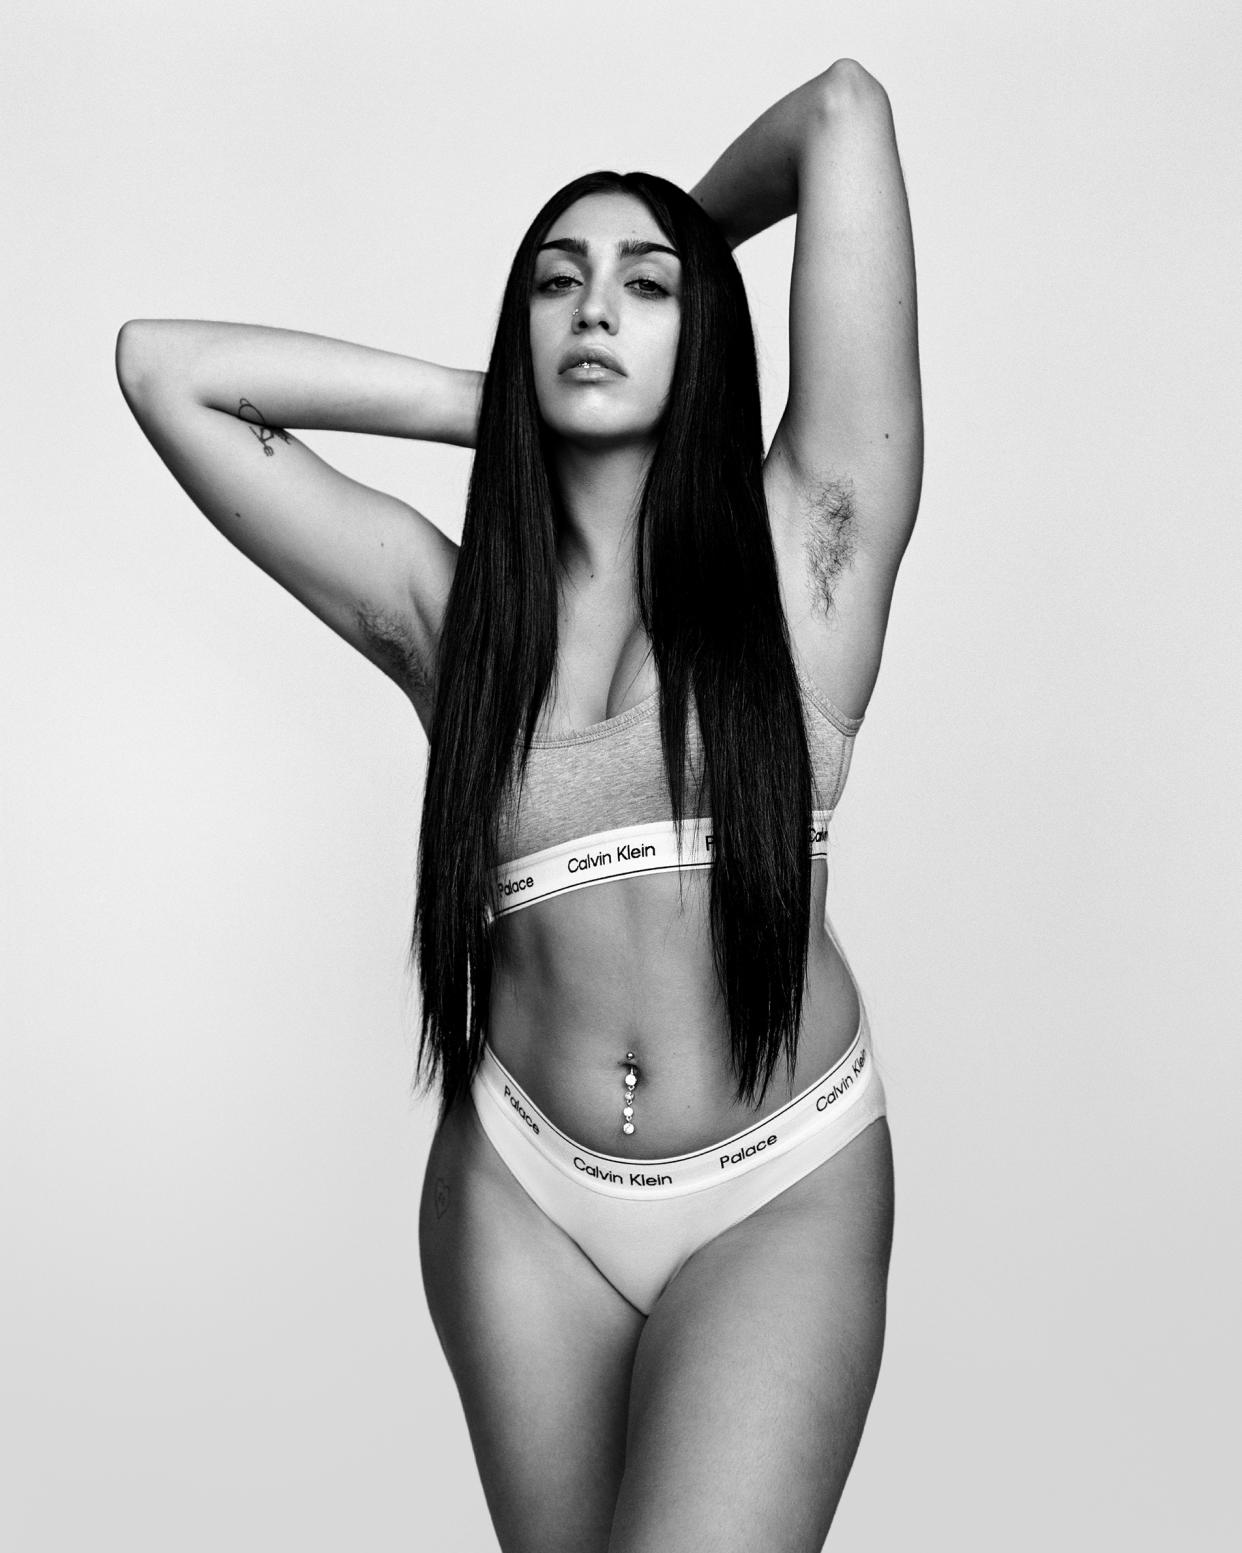 Lourdes Leon displays her arm pit hair in Calvin Klein's latest collection with Palace, CK1 Palace. (Photographed by Palace's Alasdair McLellan for Calvin Klein. Styled by Max Pearlman) 